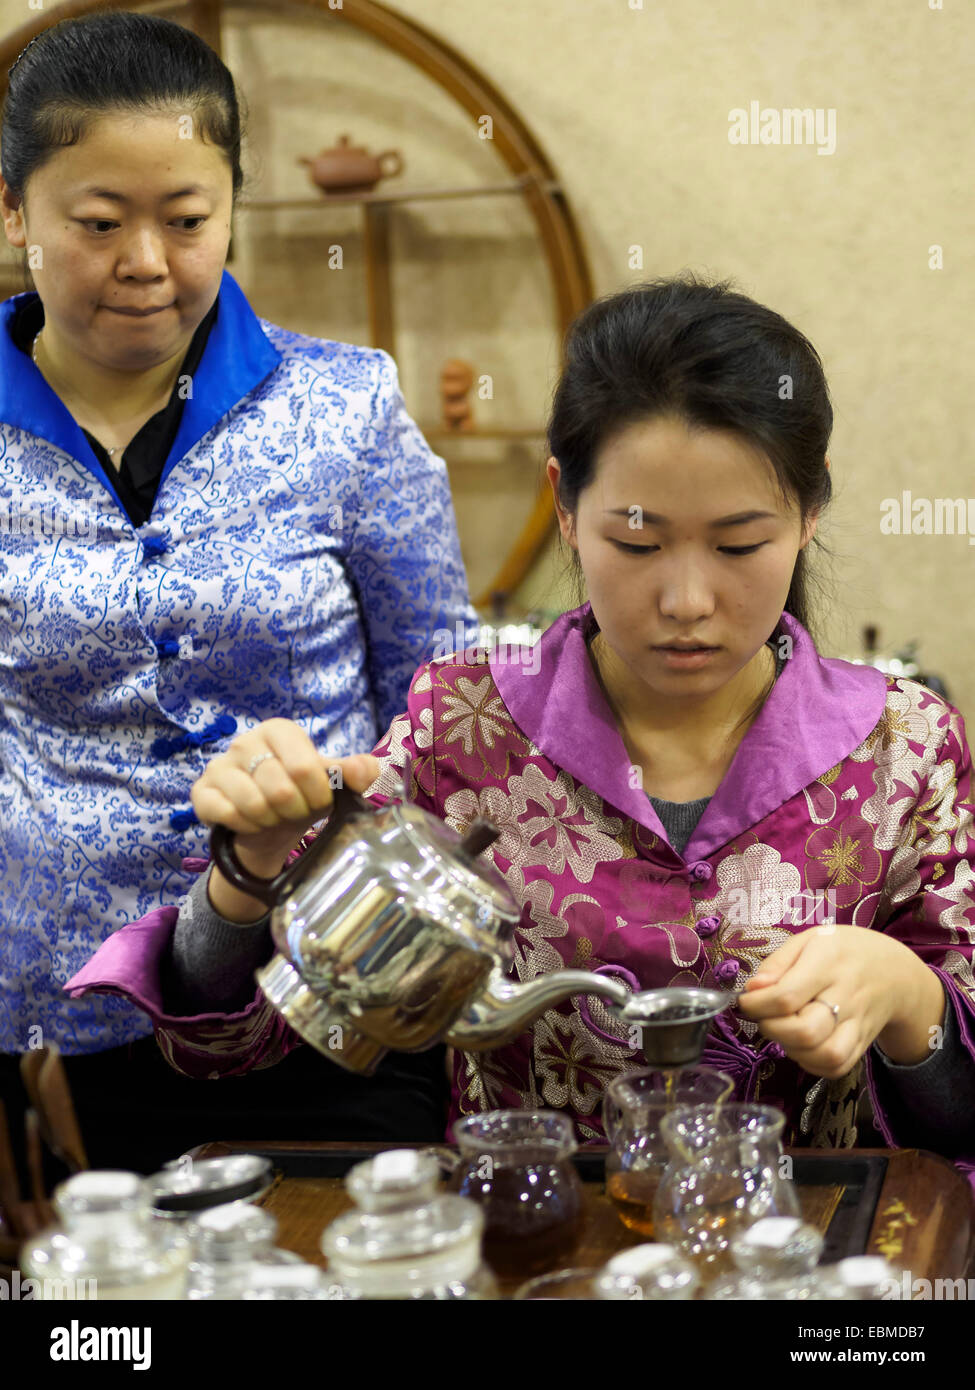 Young woman pouring tea during a traditional chinese tea ceremony Stock Photo